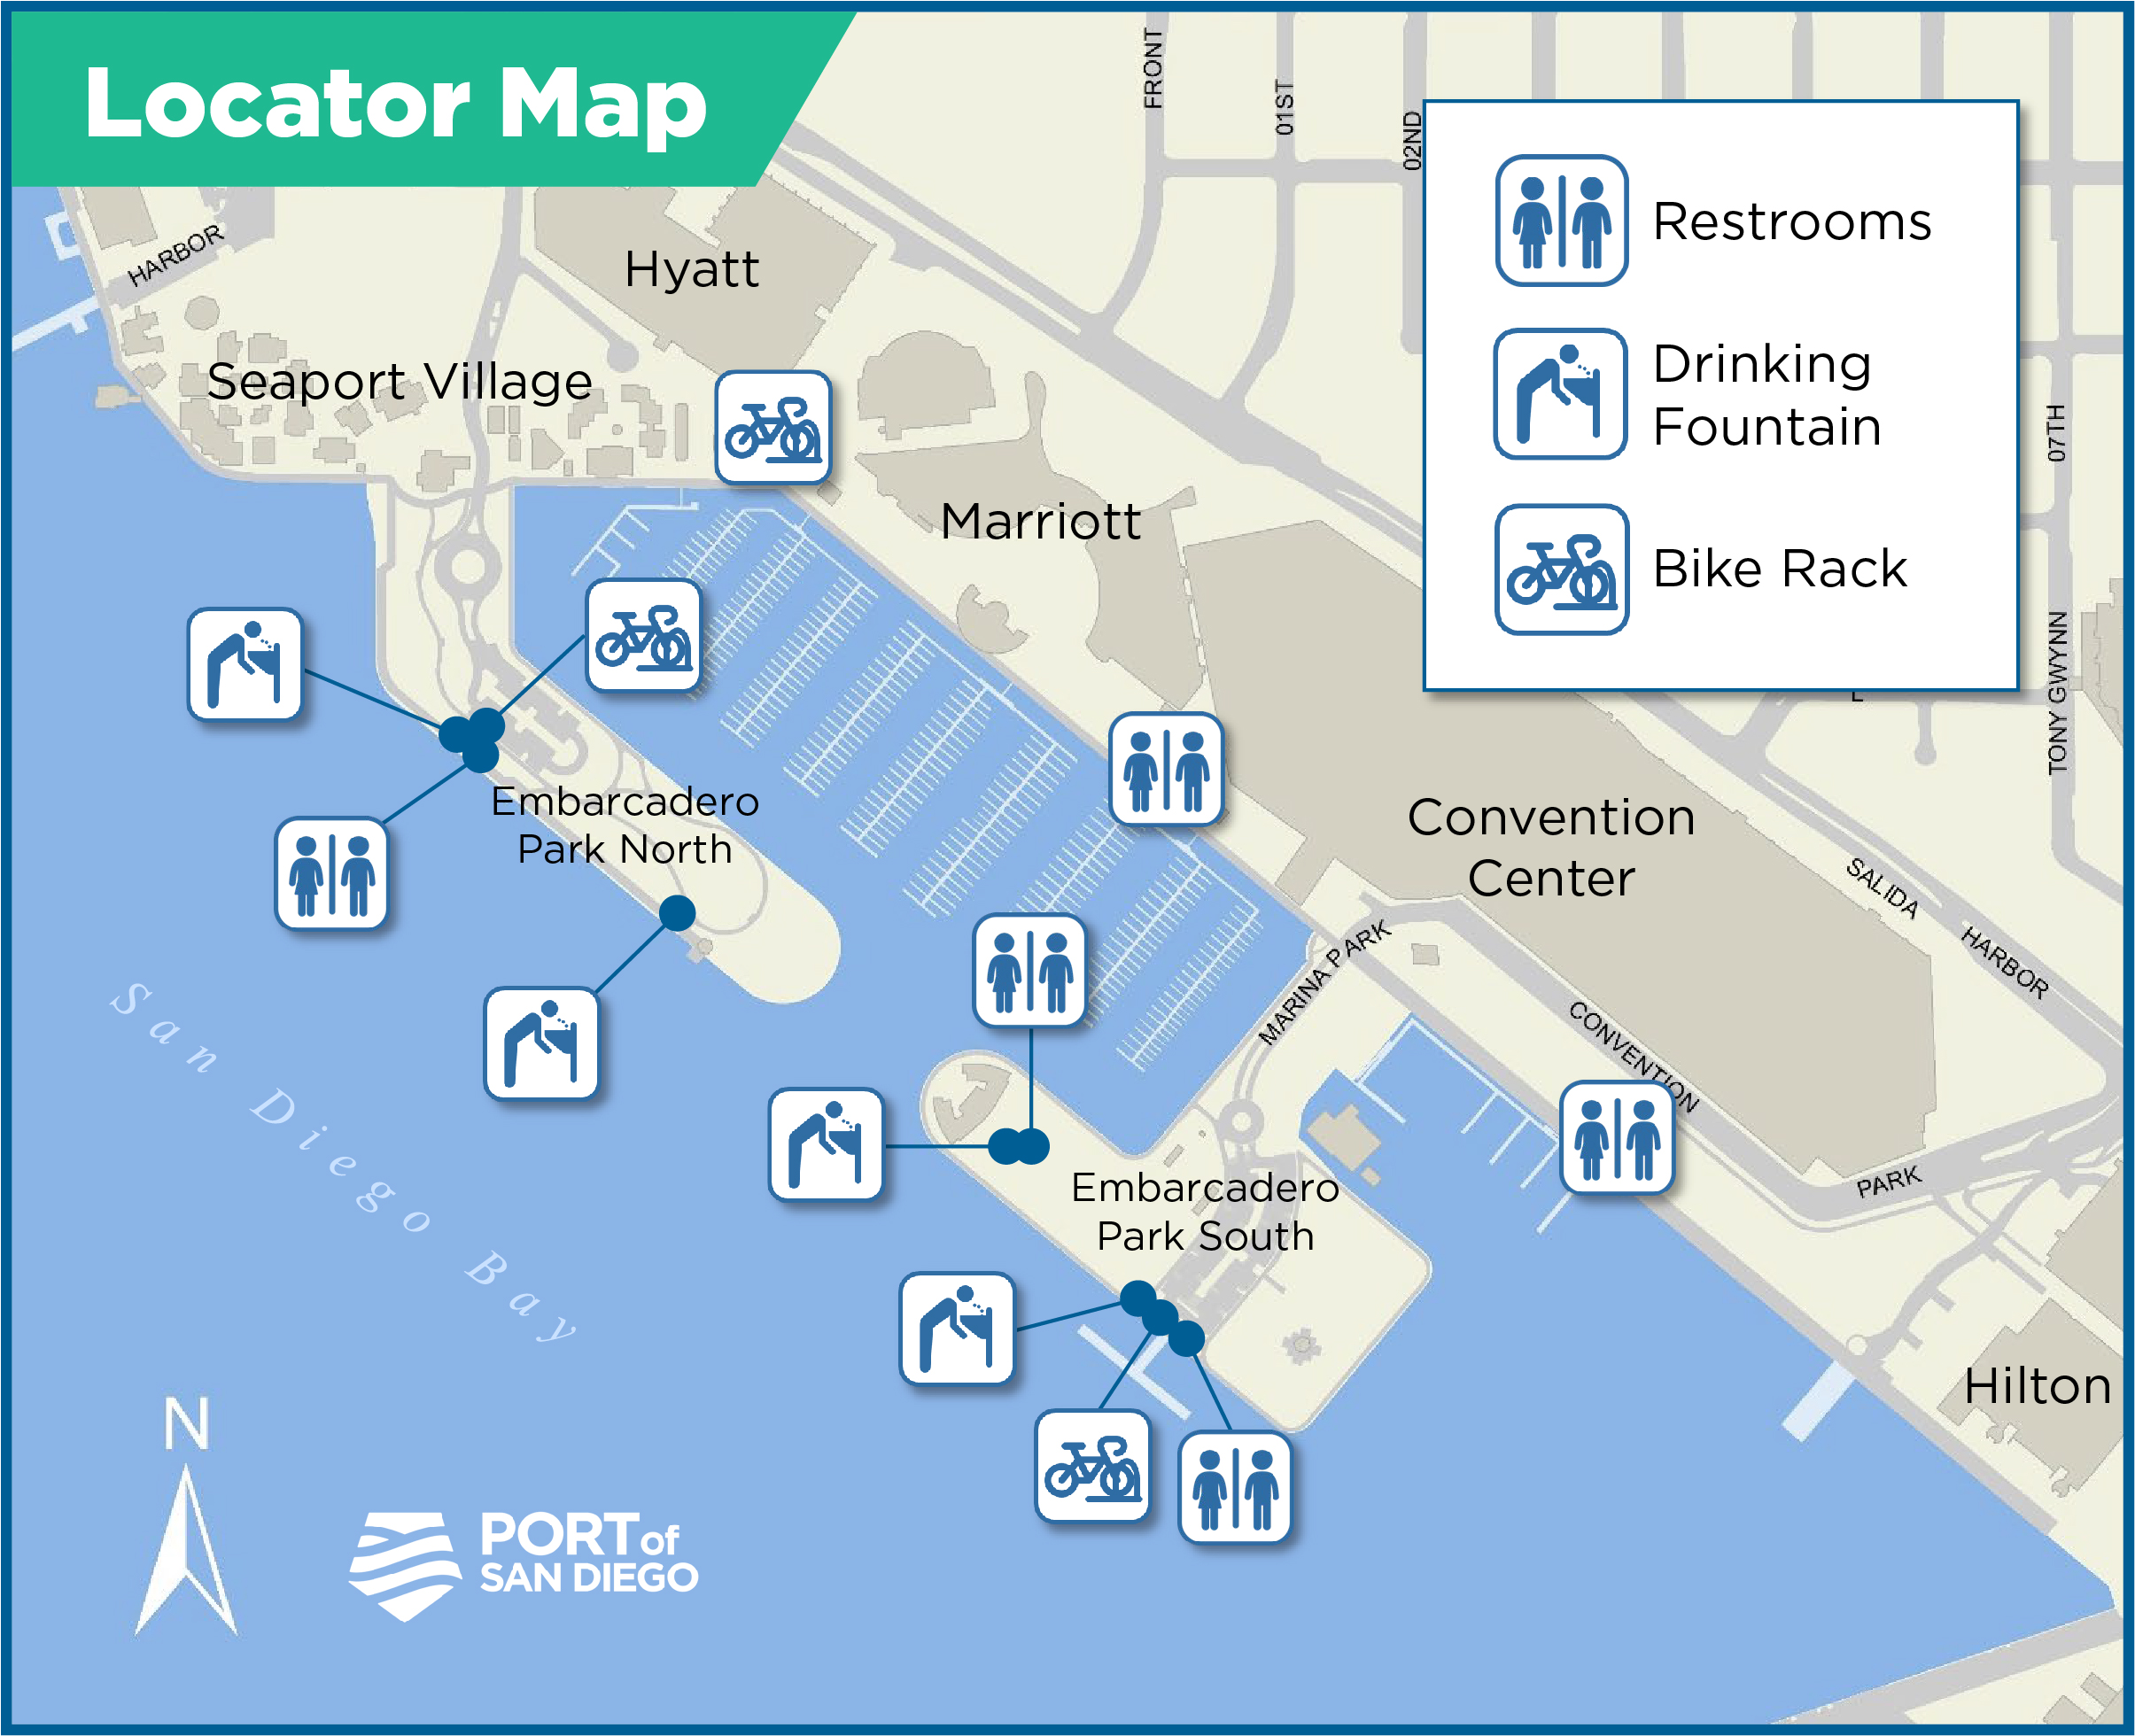 Map showing the available public amenities including bathrooms and drinking fountains around the San Diego Convention Center during Comic-Con 2022